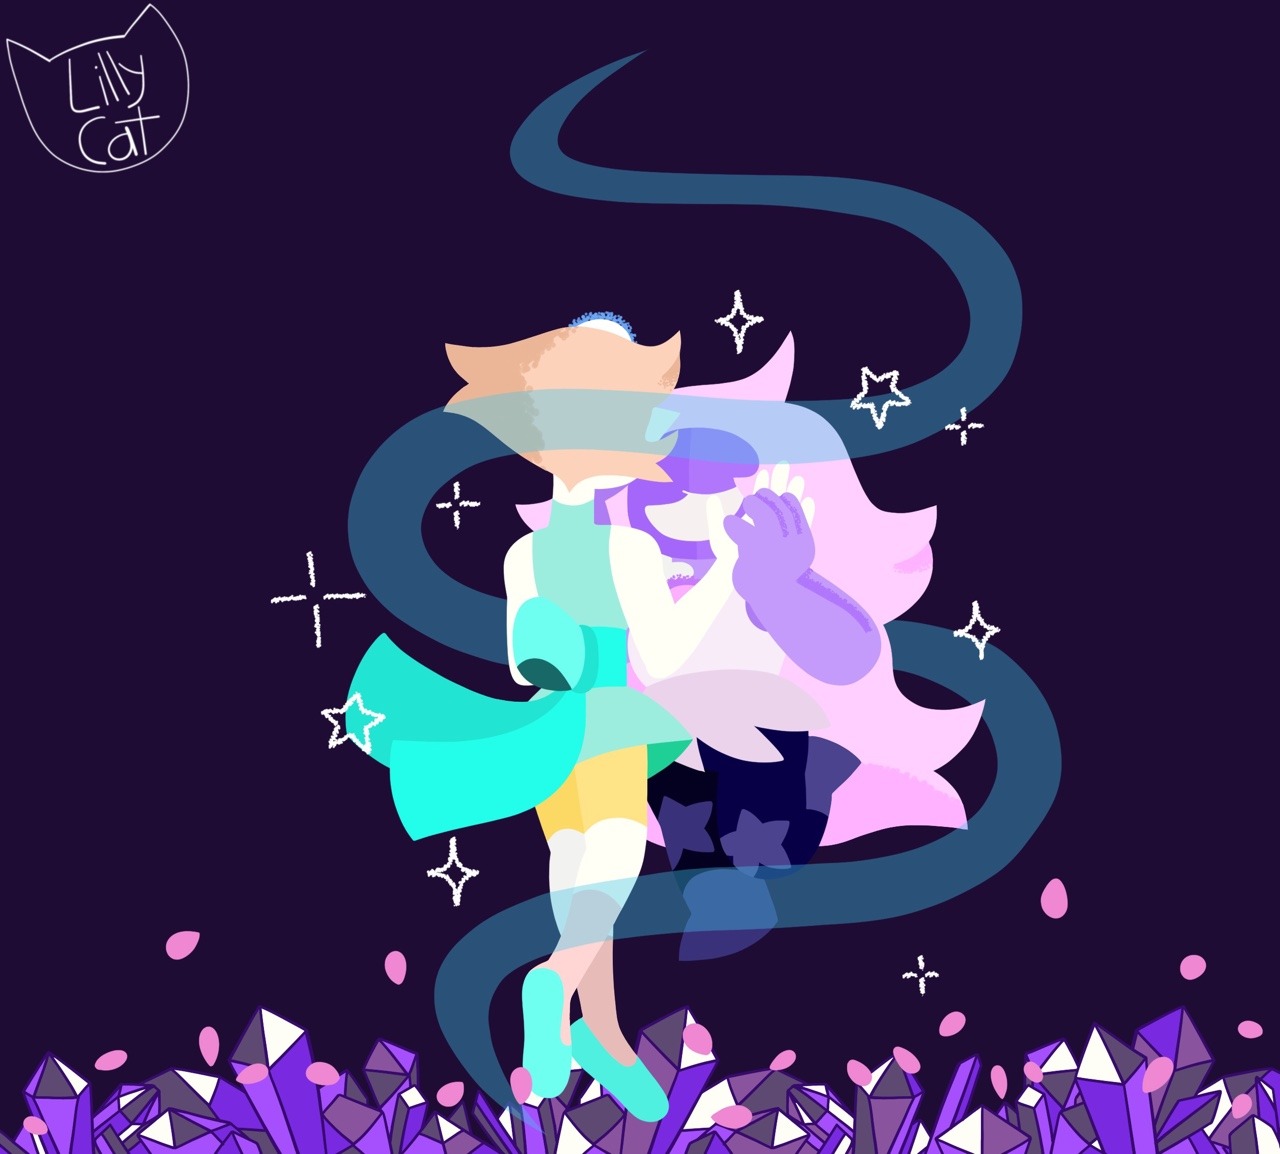 Dancing in petals (some pearlmethyst for ya)